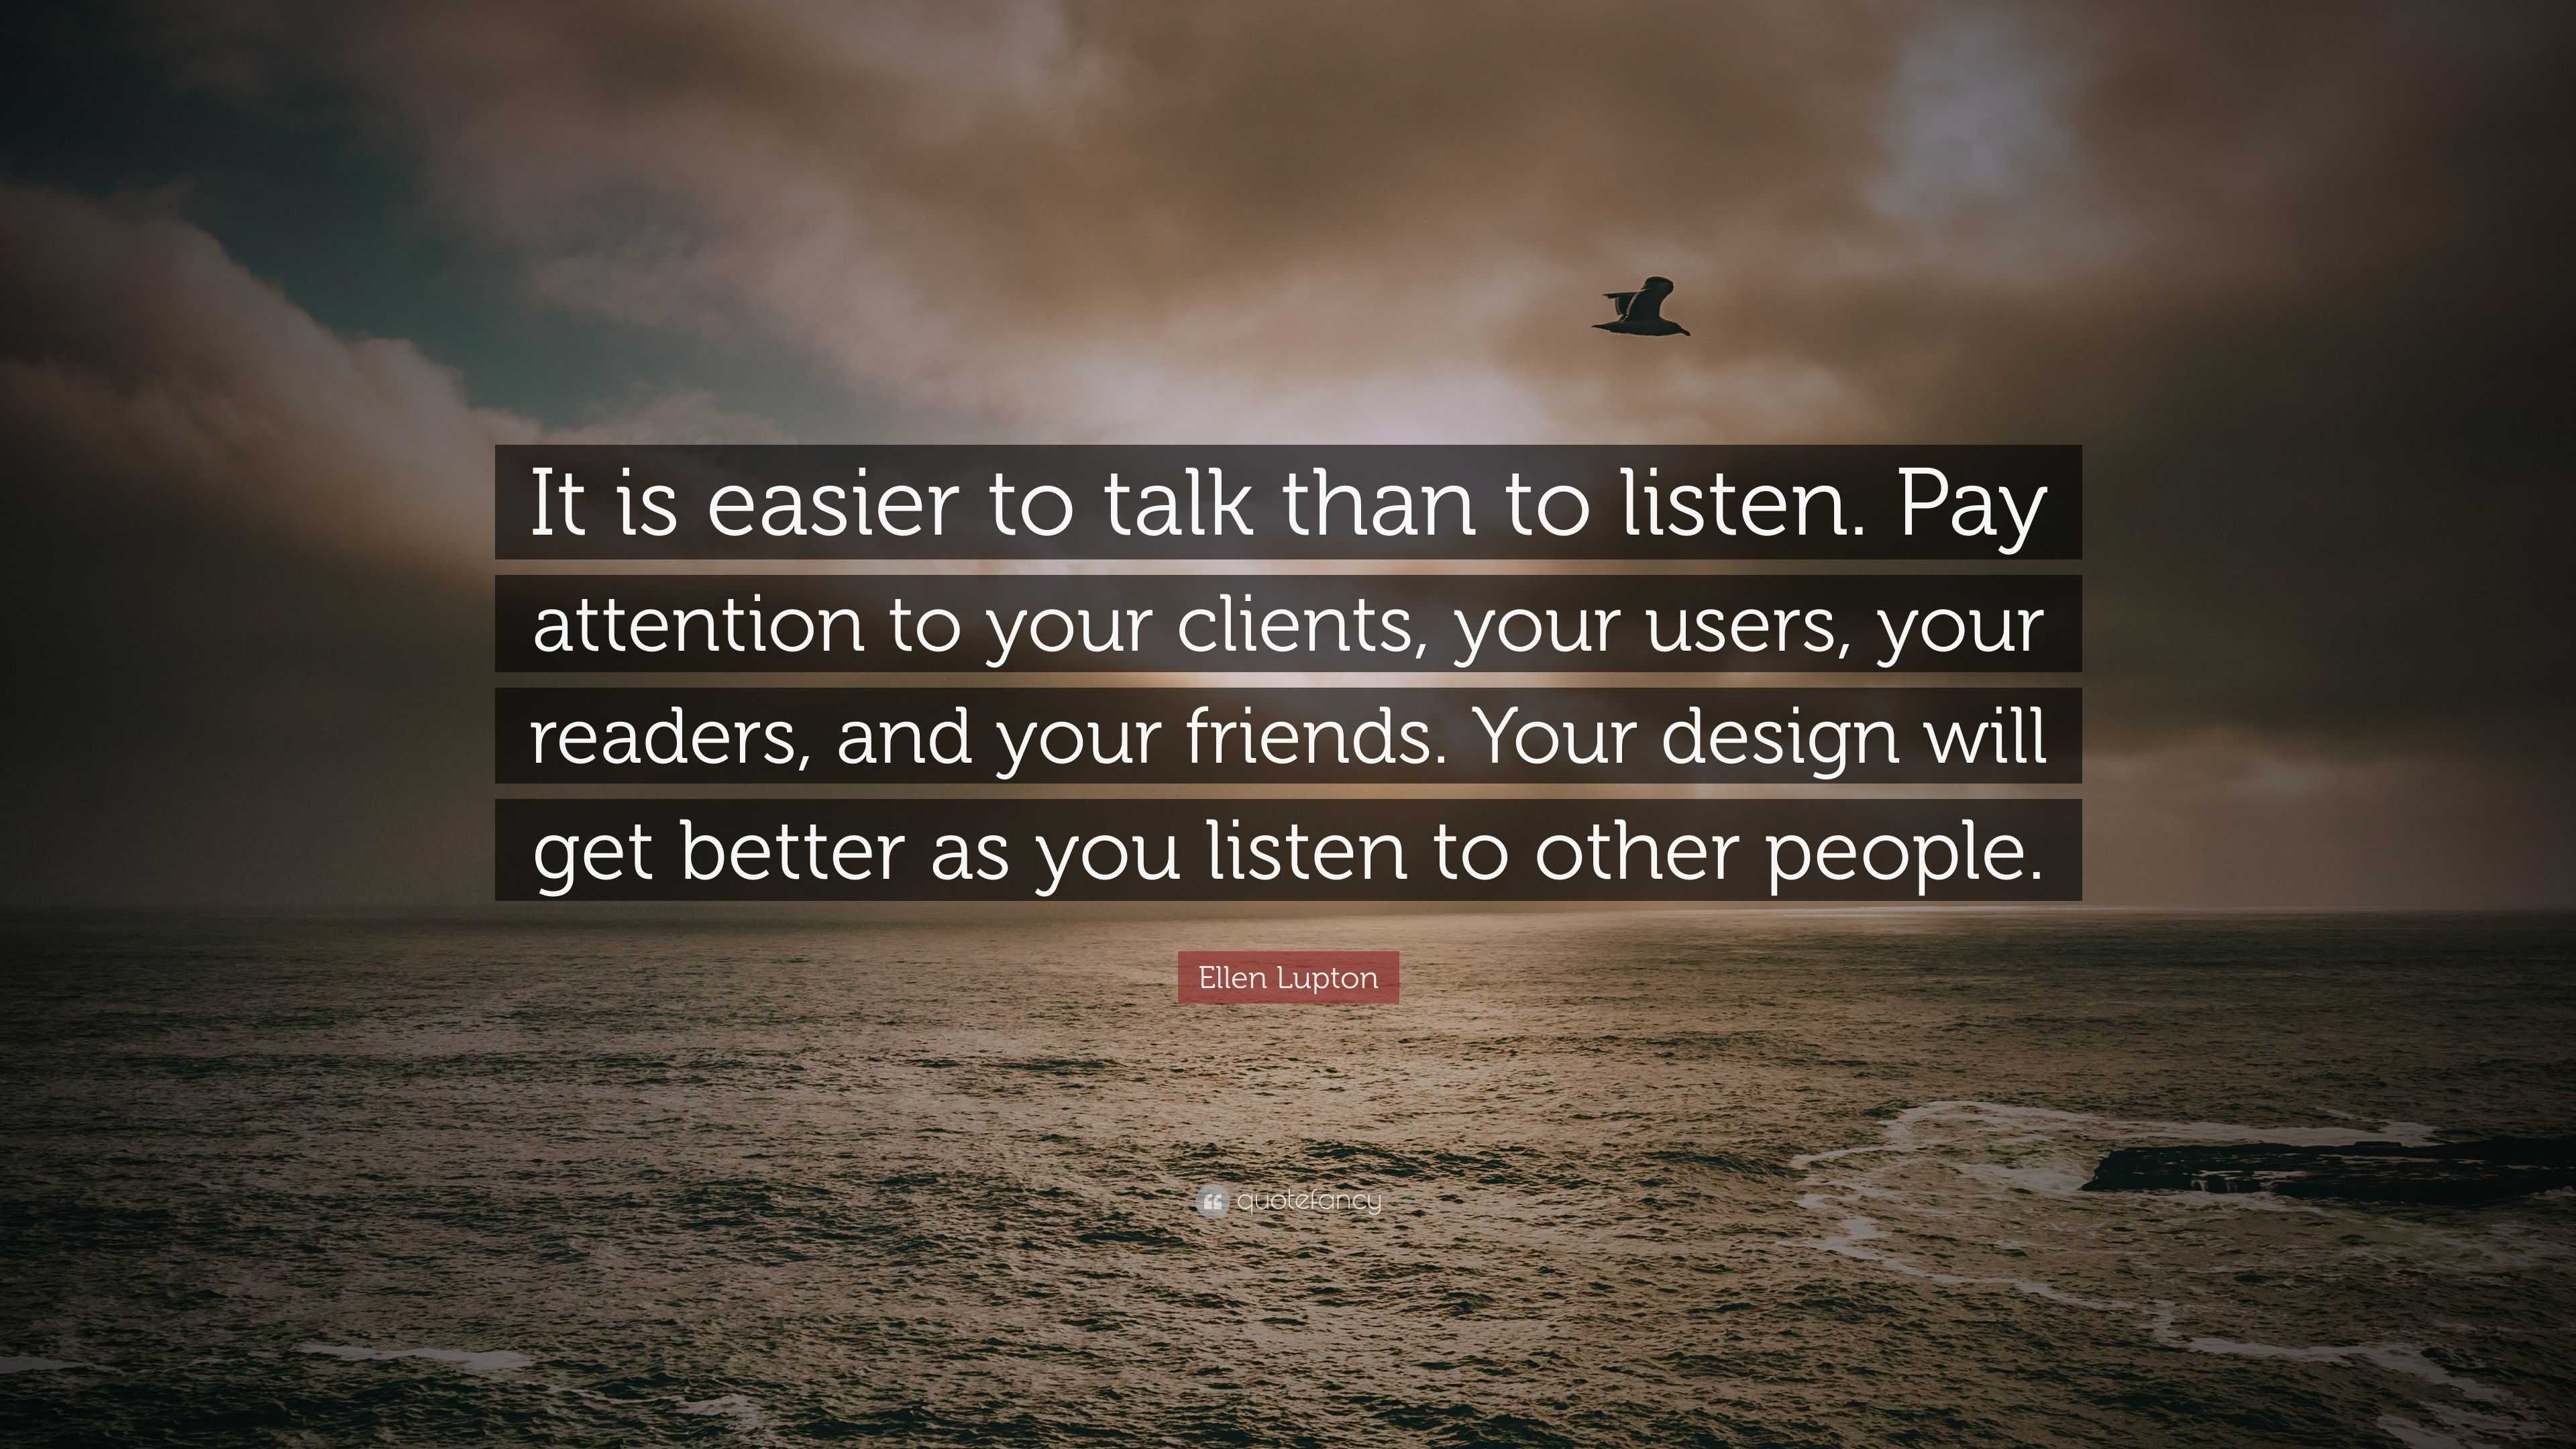 Your design will get better as you listen... 